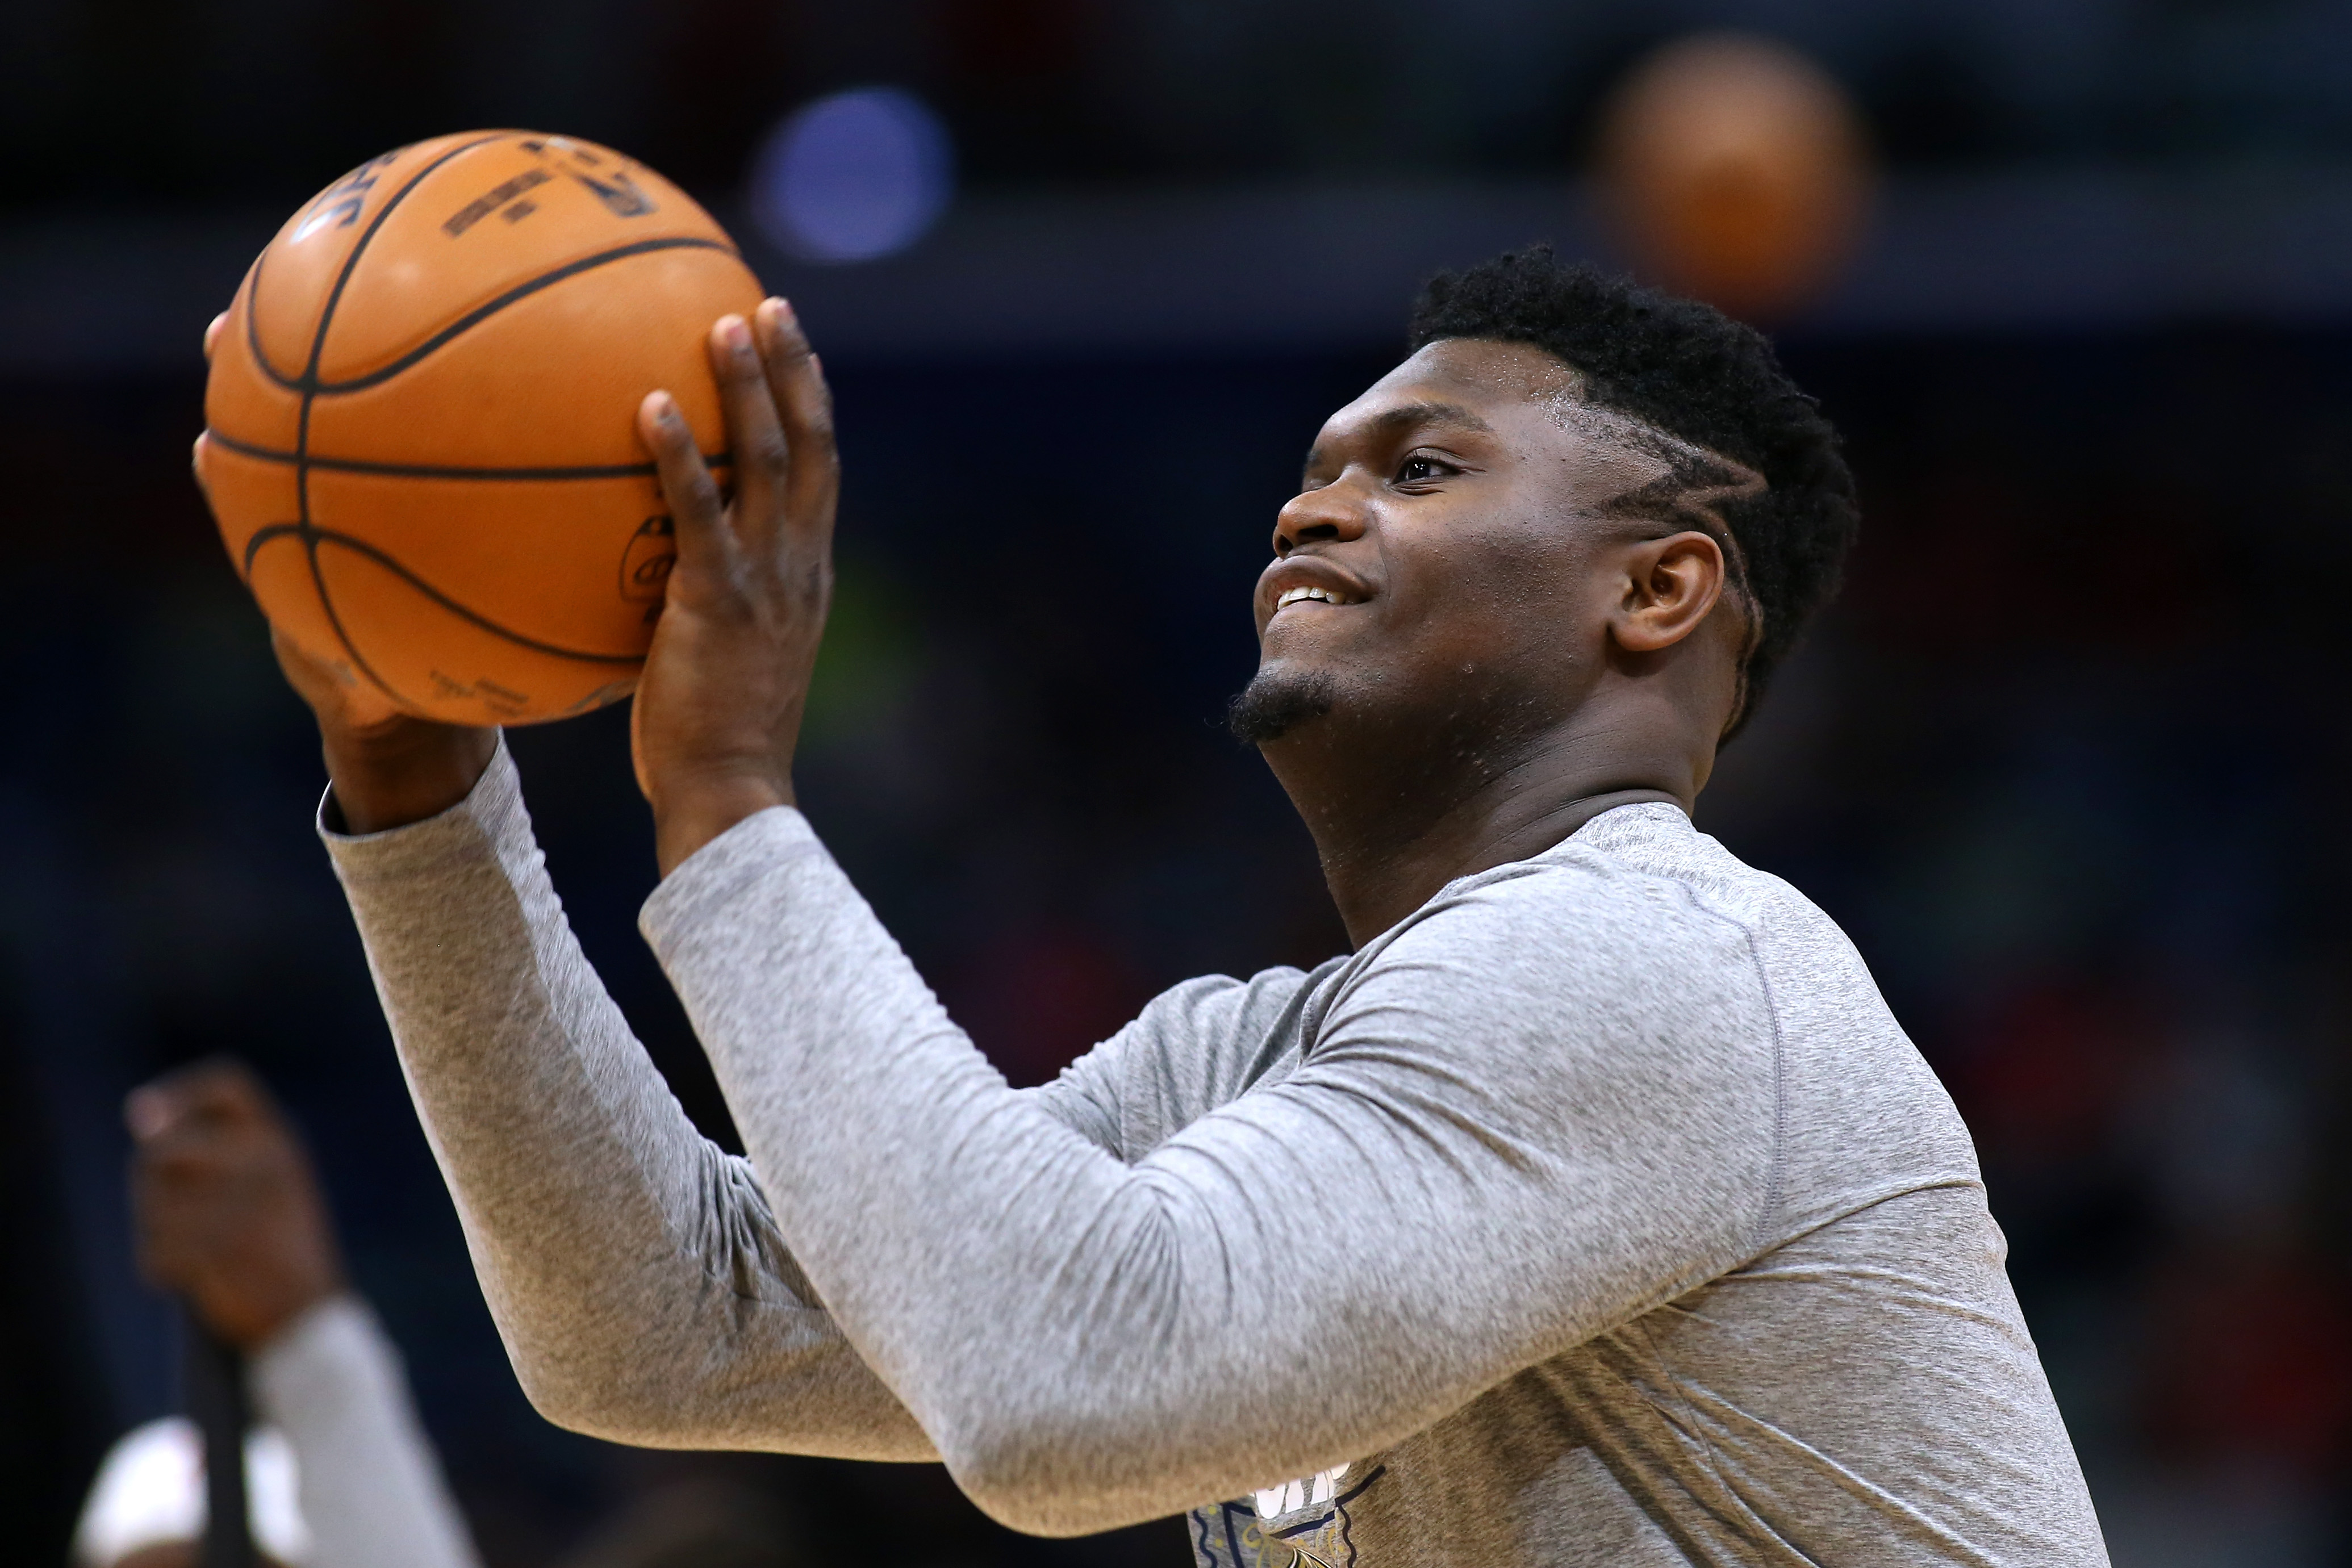 We all know Zion Williamson can dunk on whoever he pleases, but he's been working hard on improving another skill ahead of the NBA restart.